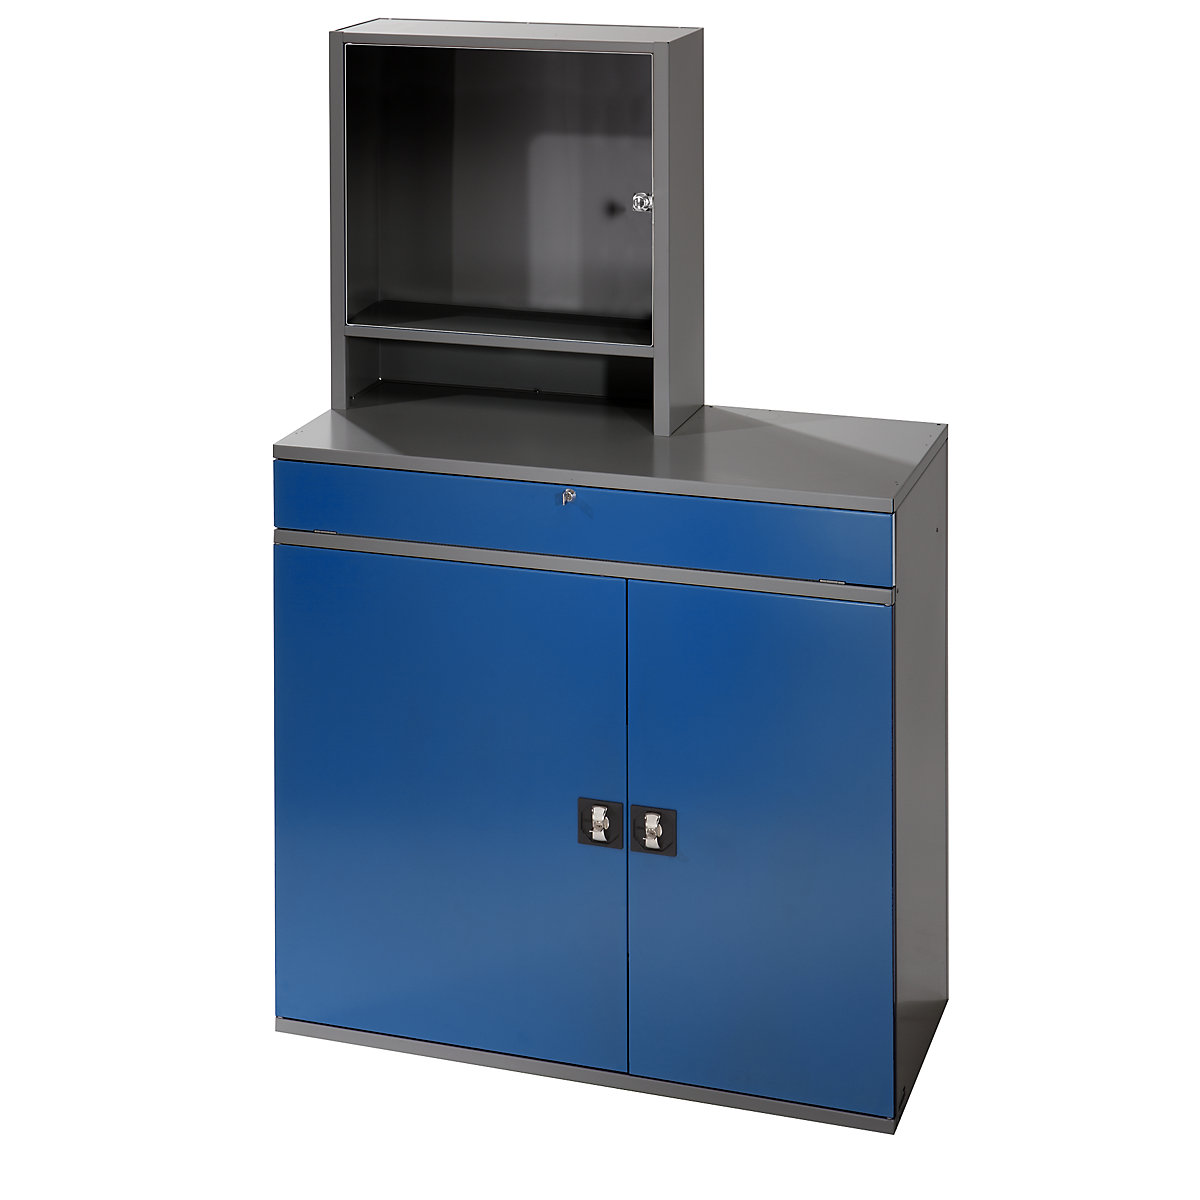 RAU – Computer workstation, monitor housing, 1 pull-out shelf, 2 drawers, width 1100 mm, charcoal / gentian blue